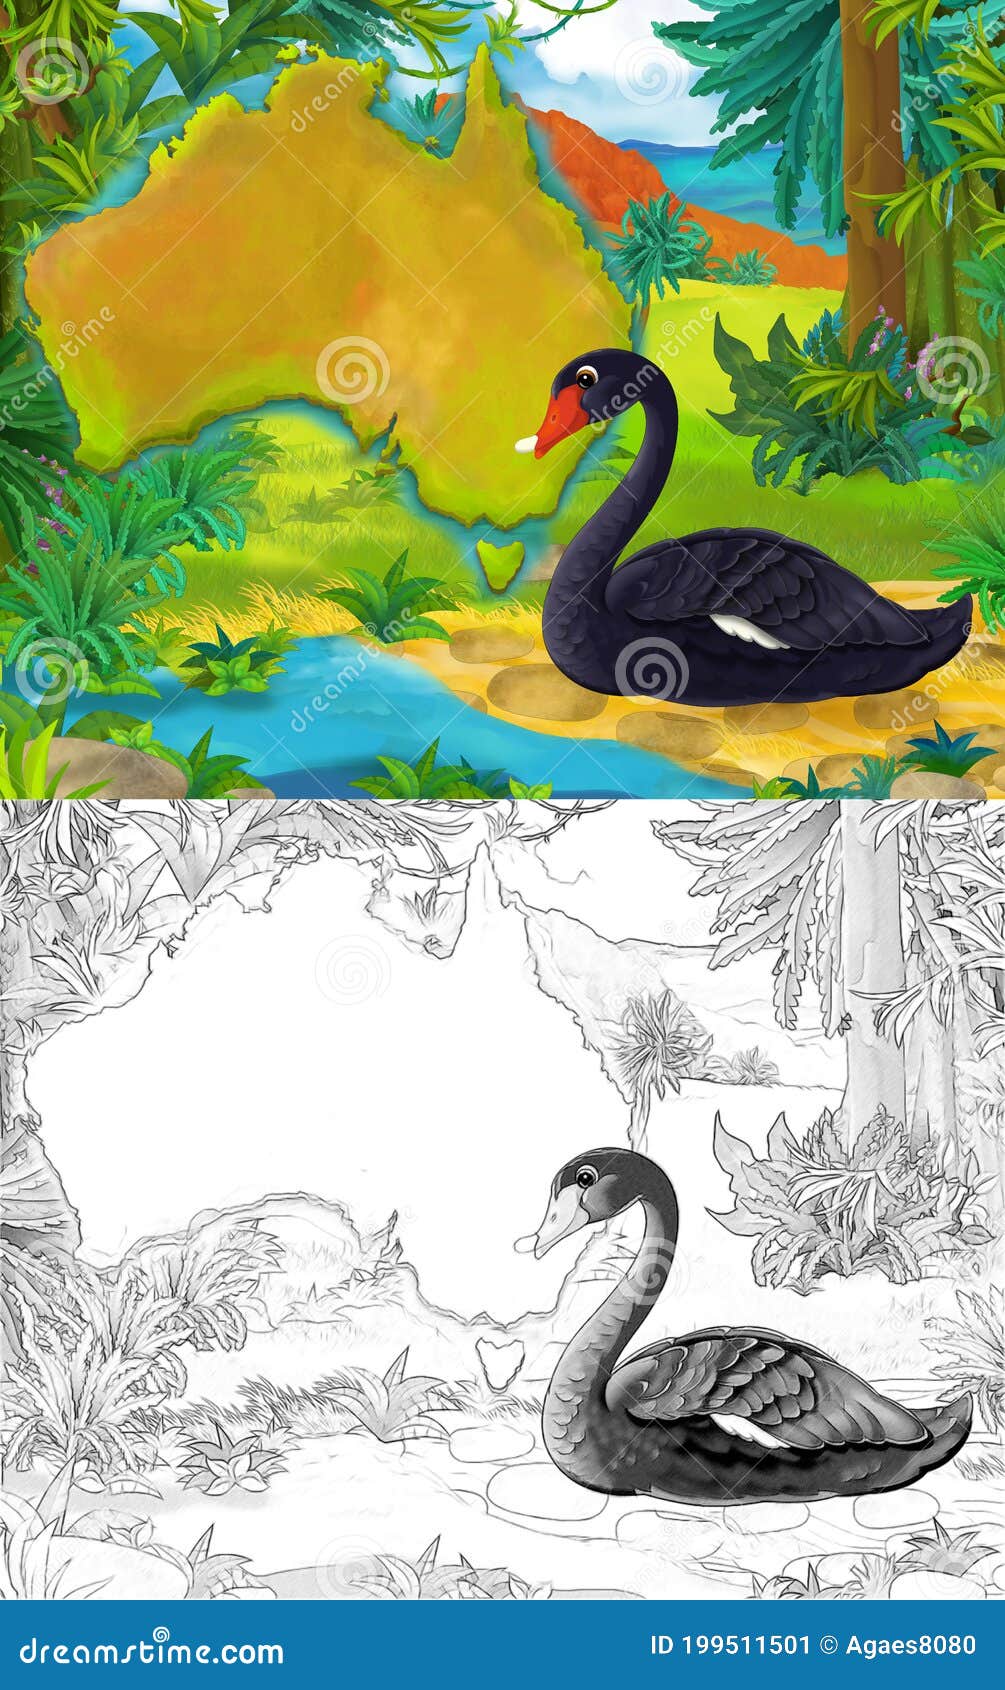 Cartoon Scene with Sketch Black Swan Bird with Continent Map - Illustration  Stock Illustration - Illustration of drawing, closeup: 199511501